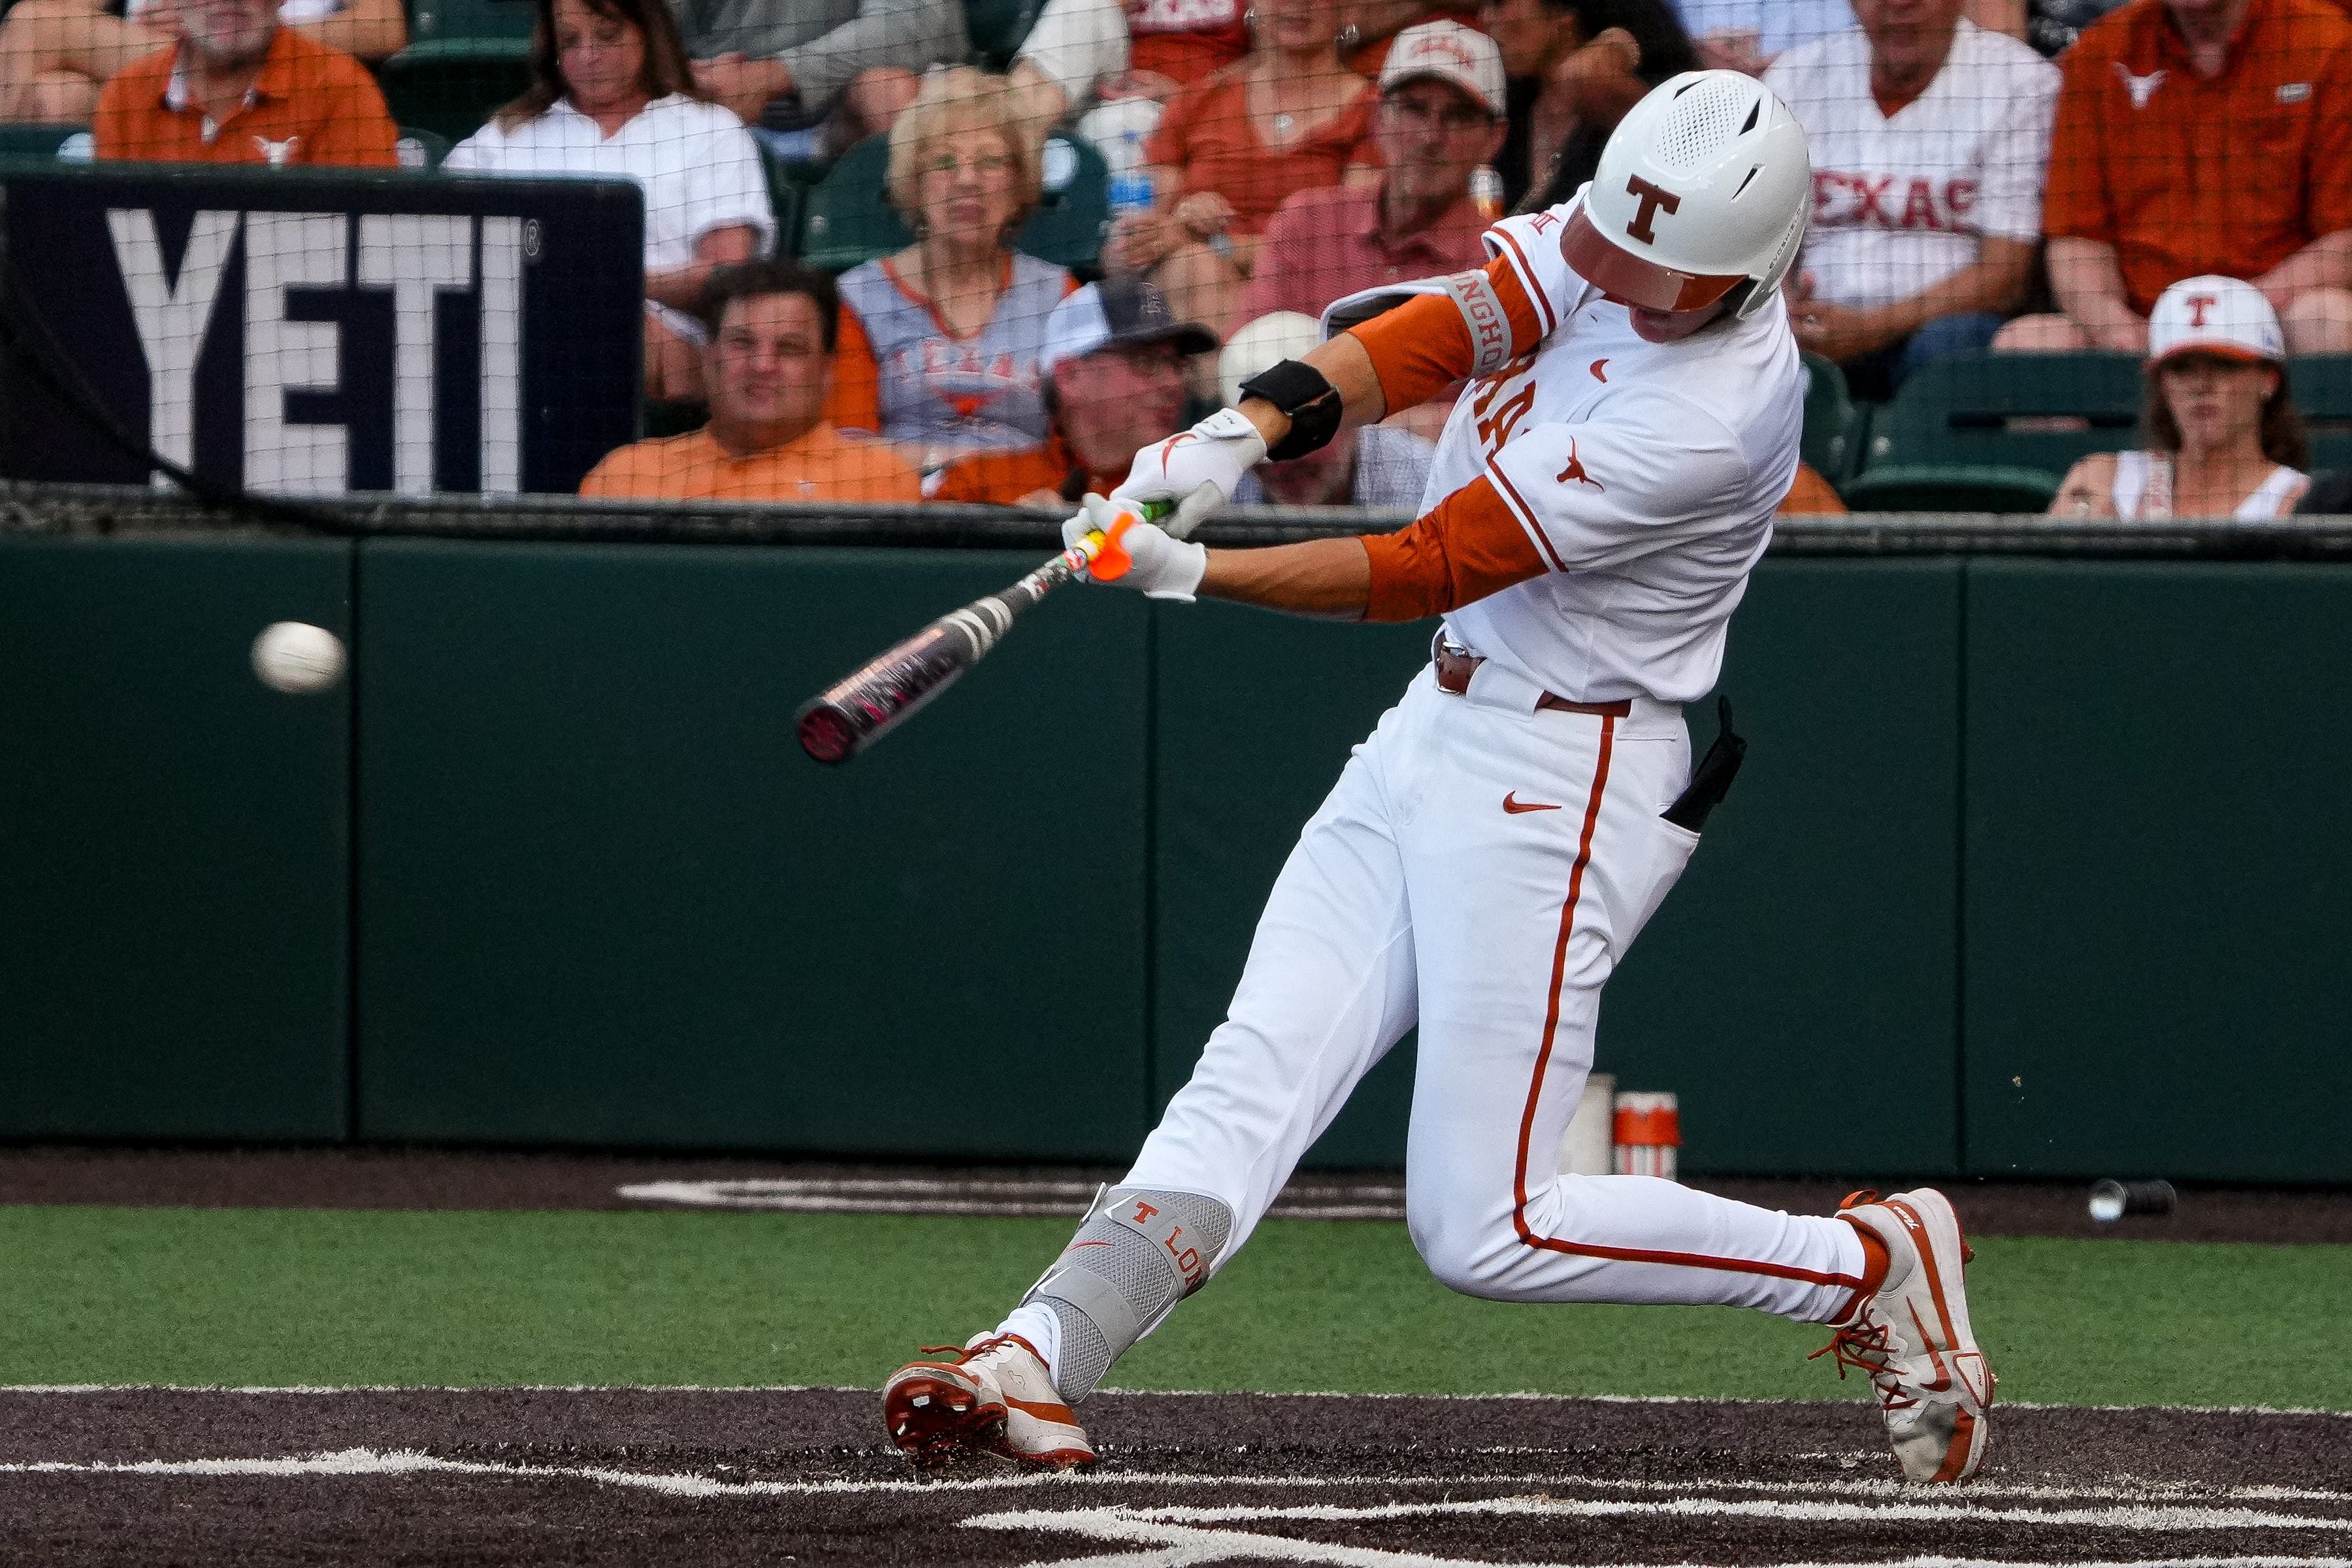 Jared Thomas has recorded 20 home runs and 76 RBIs in 124 games for the Texas Longhorns (Image Source: IMAGN).